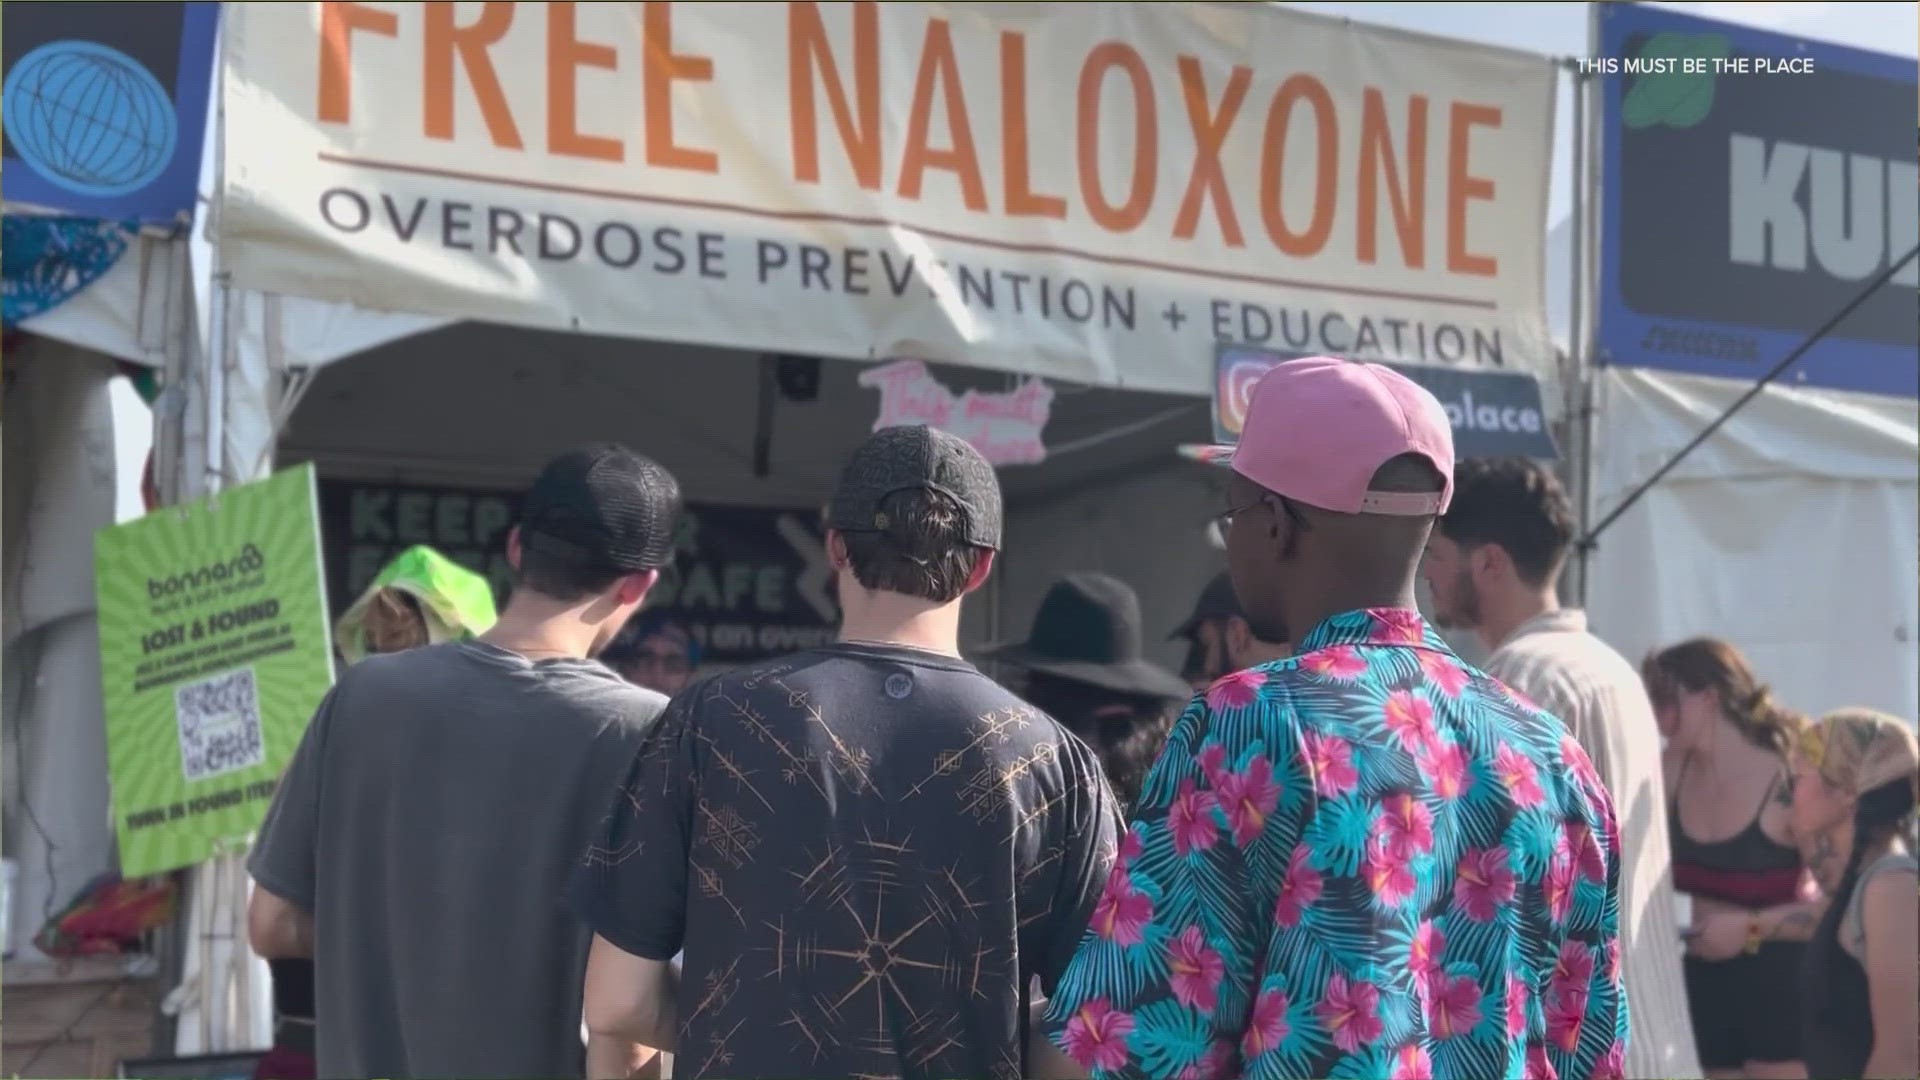 This year, the Austin City Limits Music Festival will partner with an overdose prevention nonprofit to educate attendees about the dangers of fentanyl.